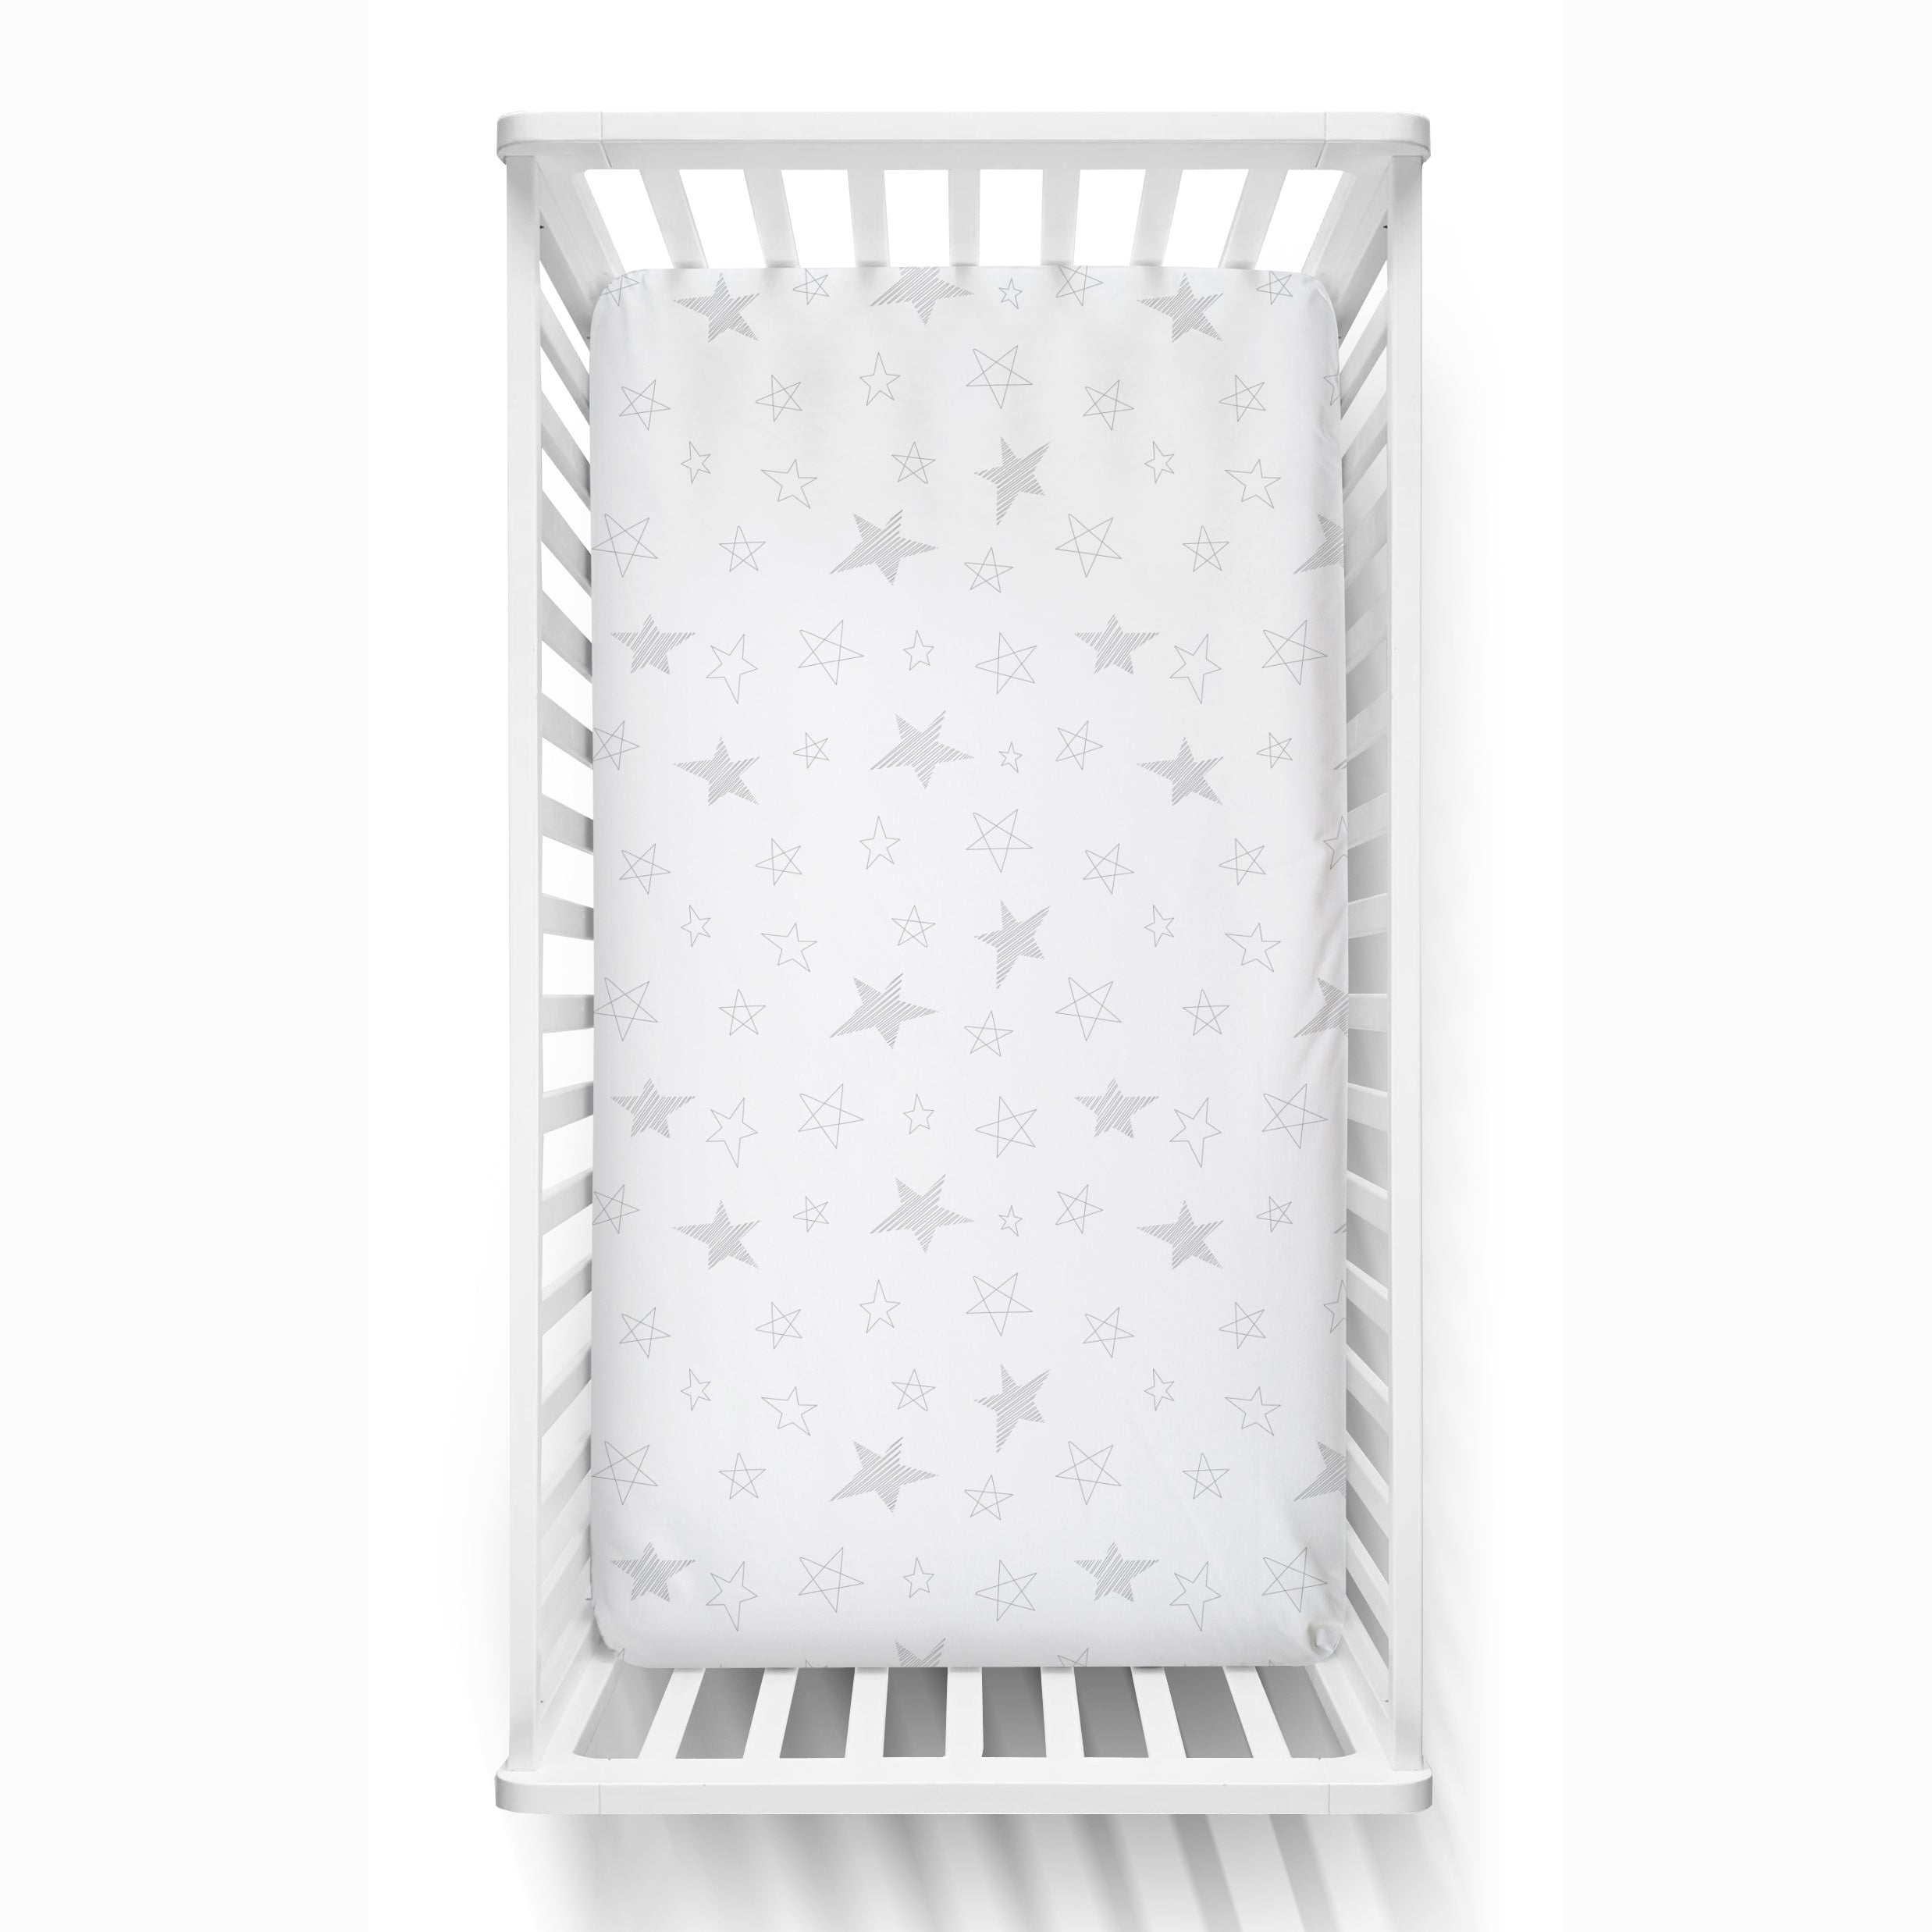 The White Cradle Flat Bed Sheet for Baby Cot & Mattress - Big Stars